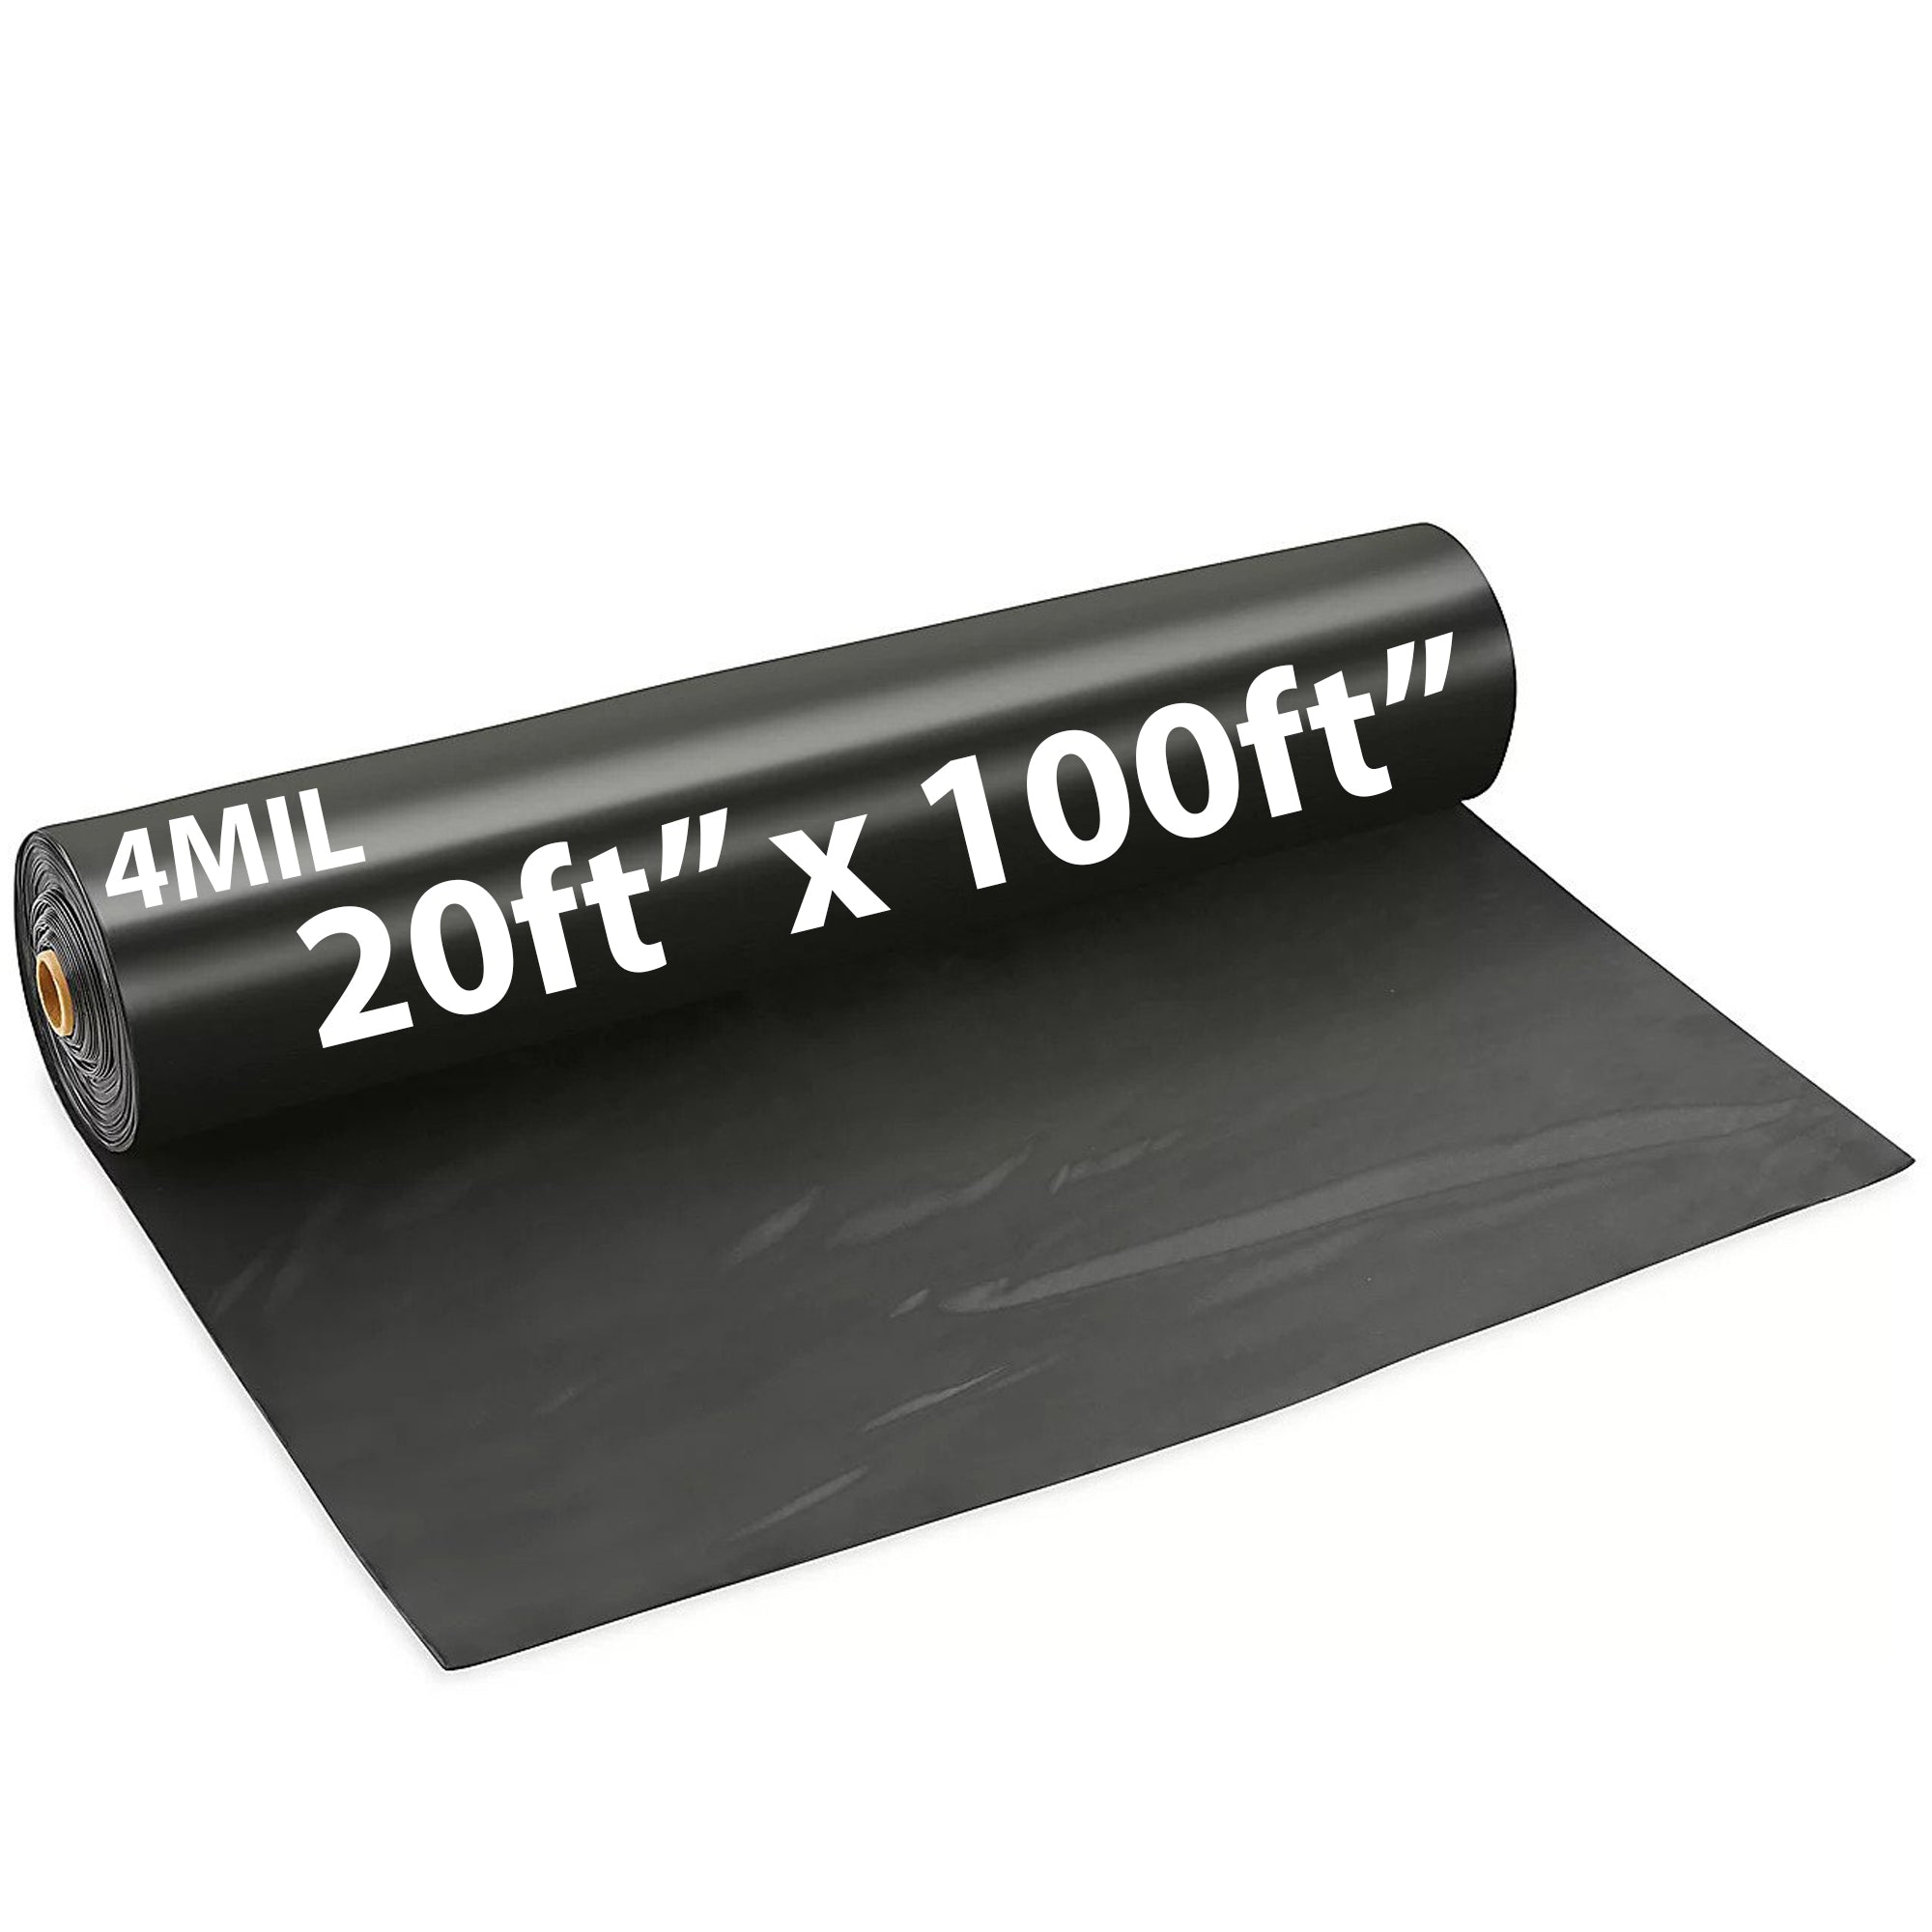 Black Poly Sheeting Tarp 4 Mil 20ftx100ft Thick Frosted Plastic Tarp